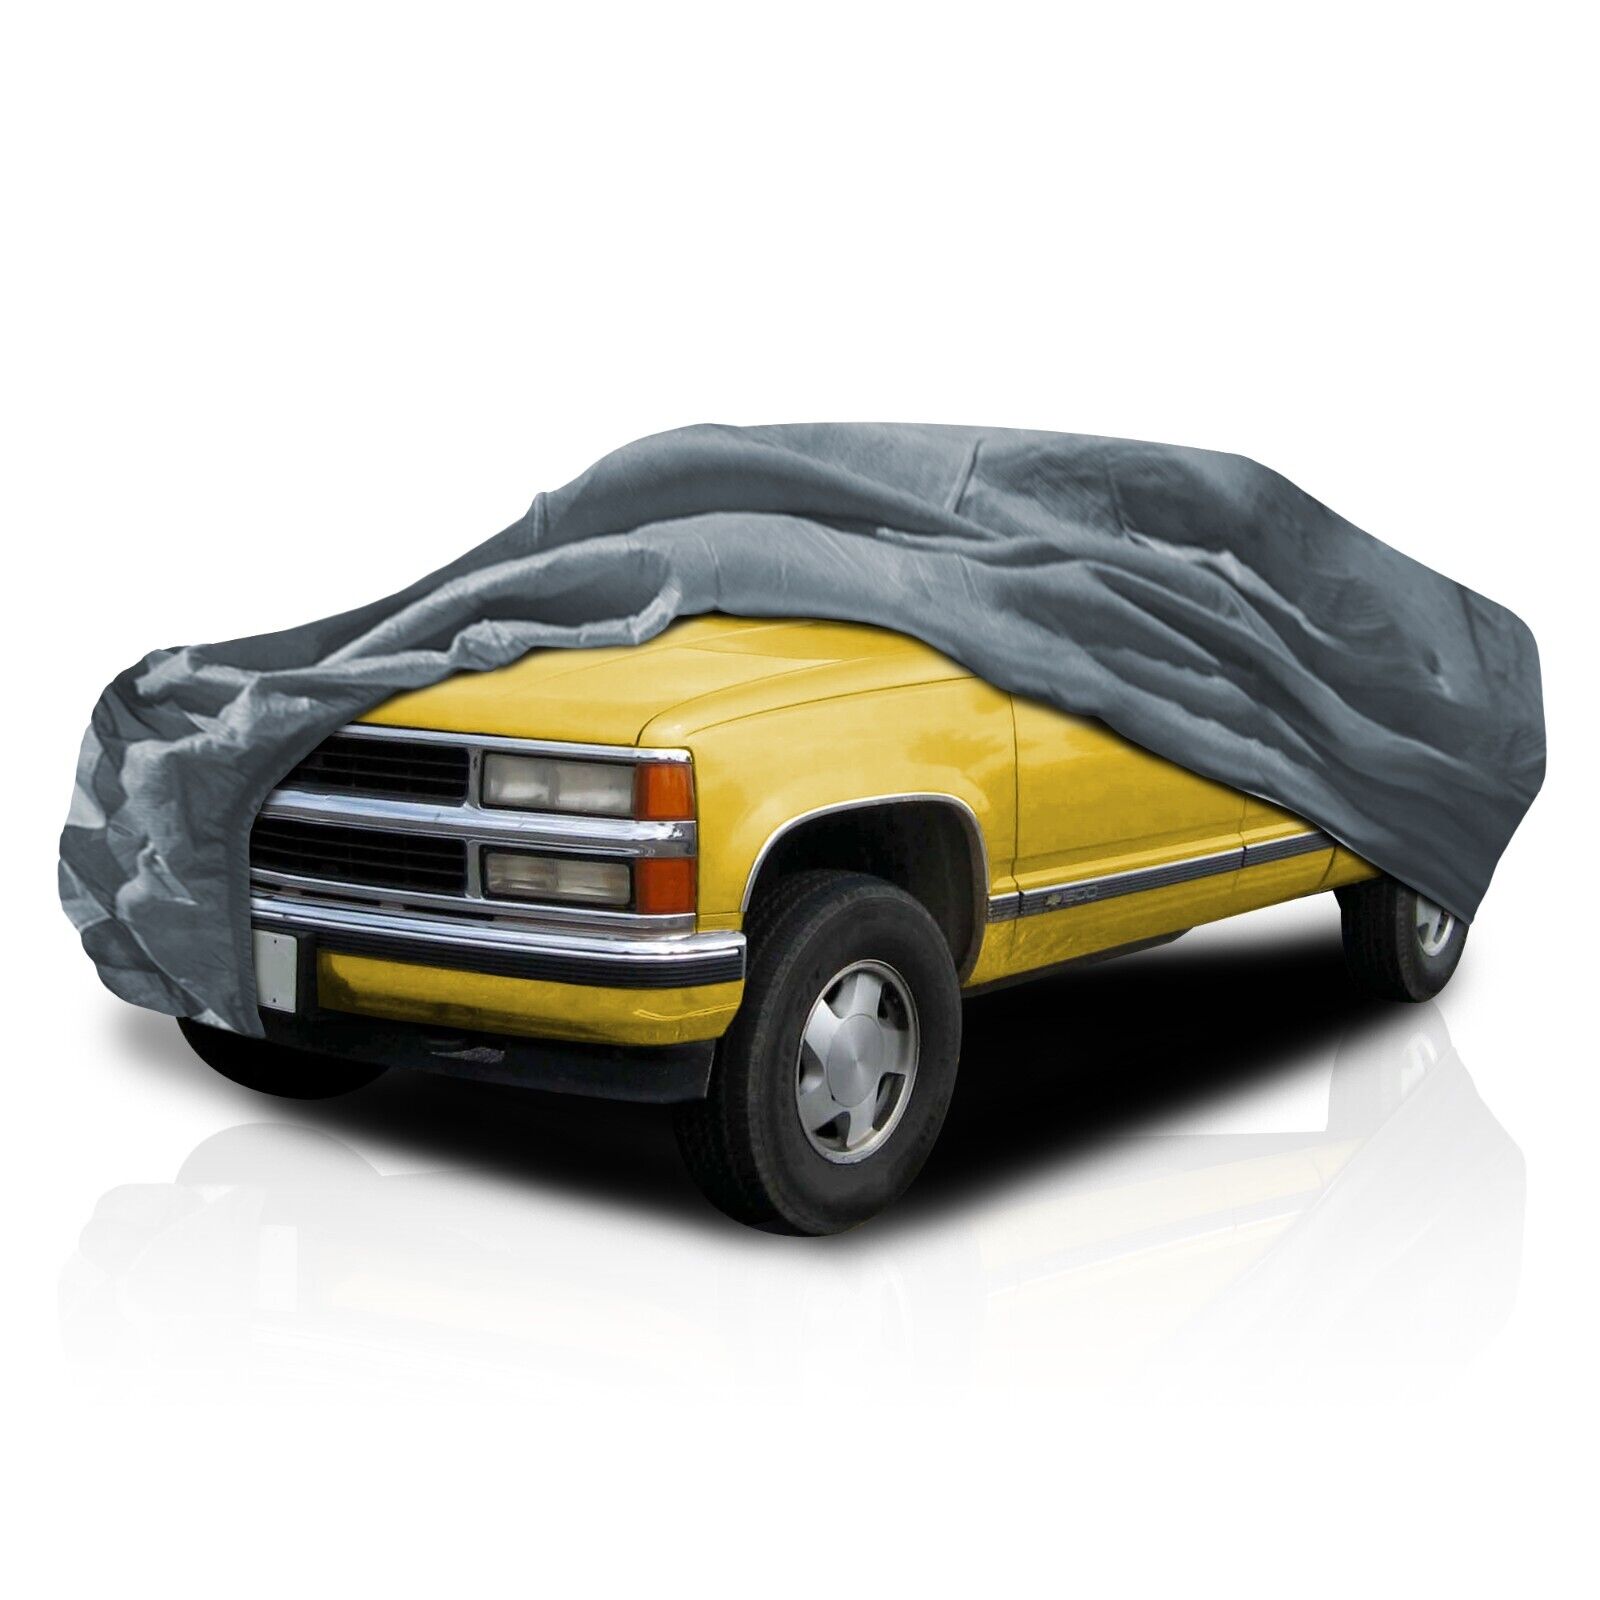 WeatherTec Plus HD Truck Car Cover for Chevy GMC C/K Series 1941-2002